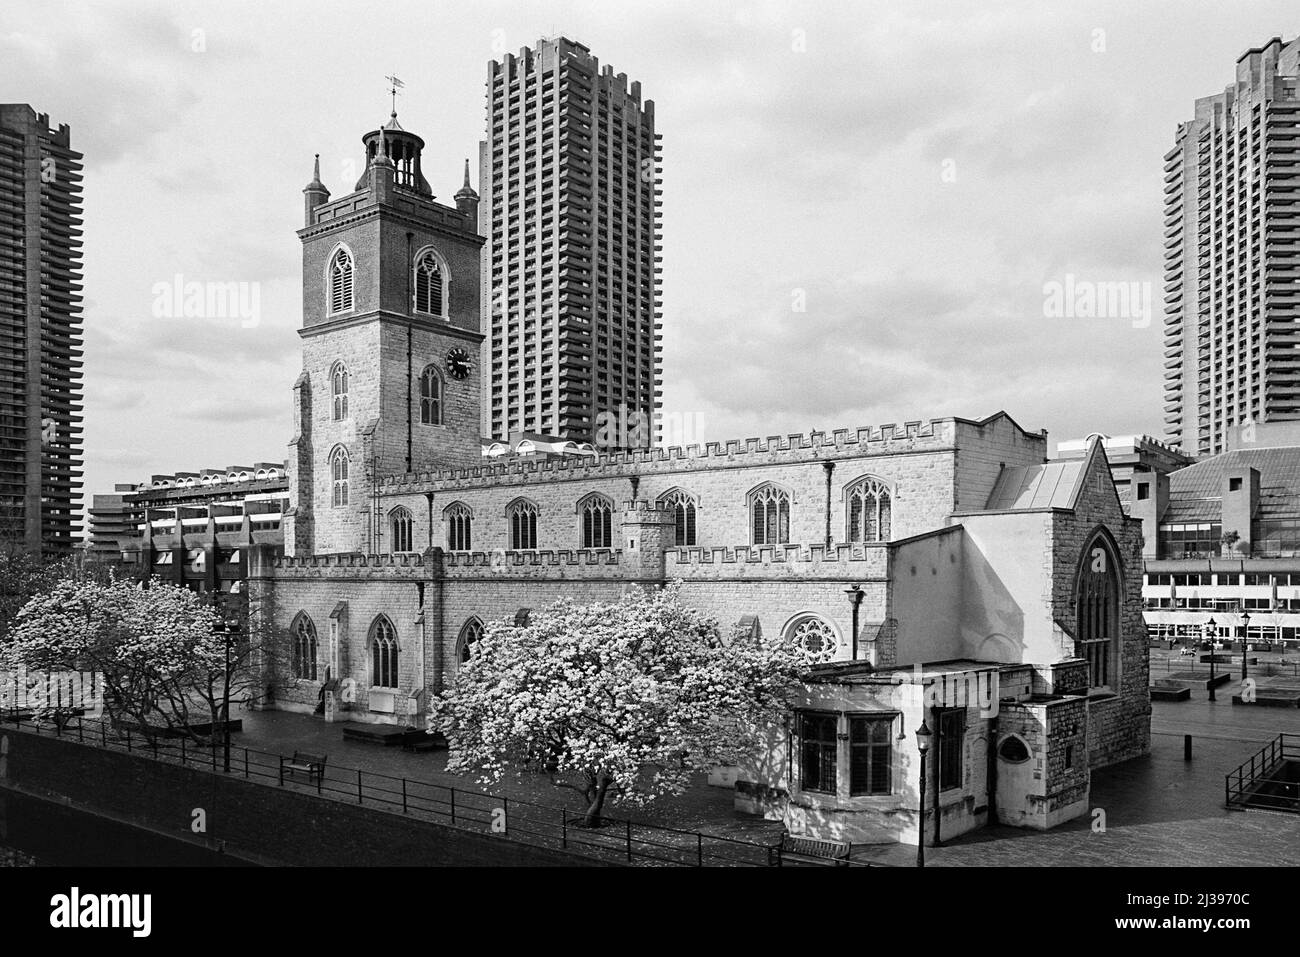 The historic St Giles-without-Cripplegate church in the Barbican, City of London, with tower blocks in the background Stock Photo